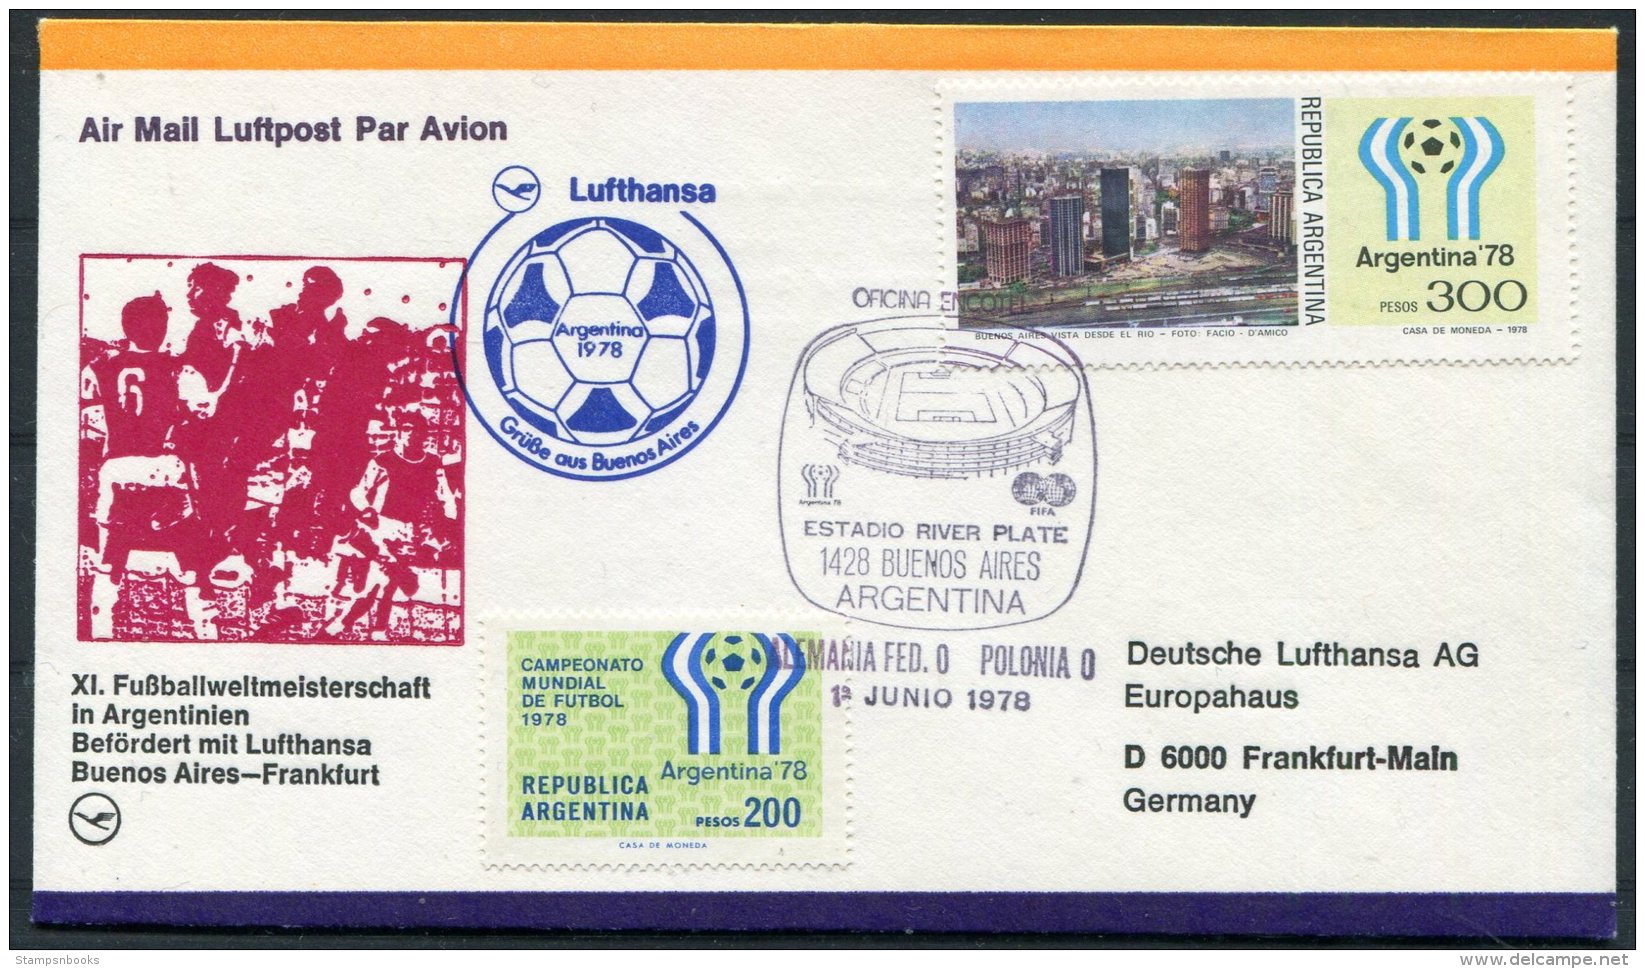 1978 Argentina Football World Cup, Germany Lufthansa Flight Cover, Germany 0 V Poland 0 - Covers & Documents